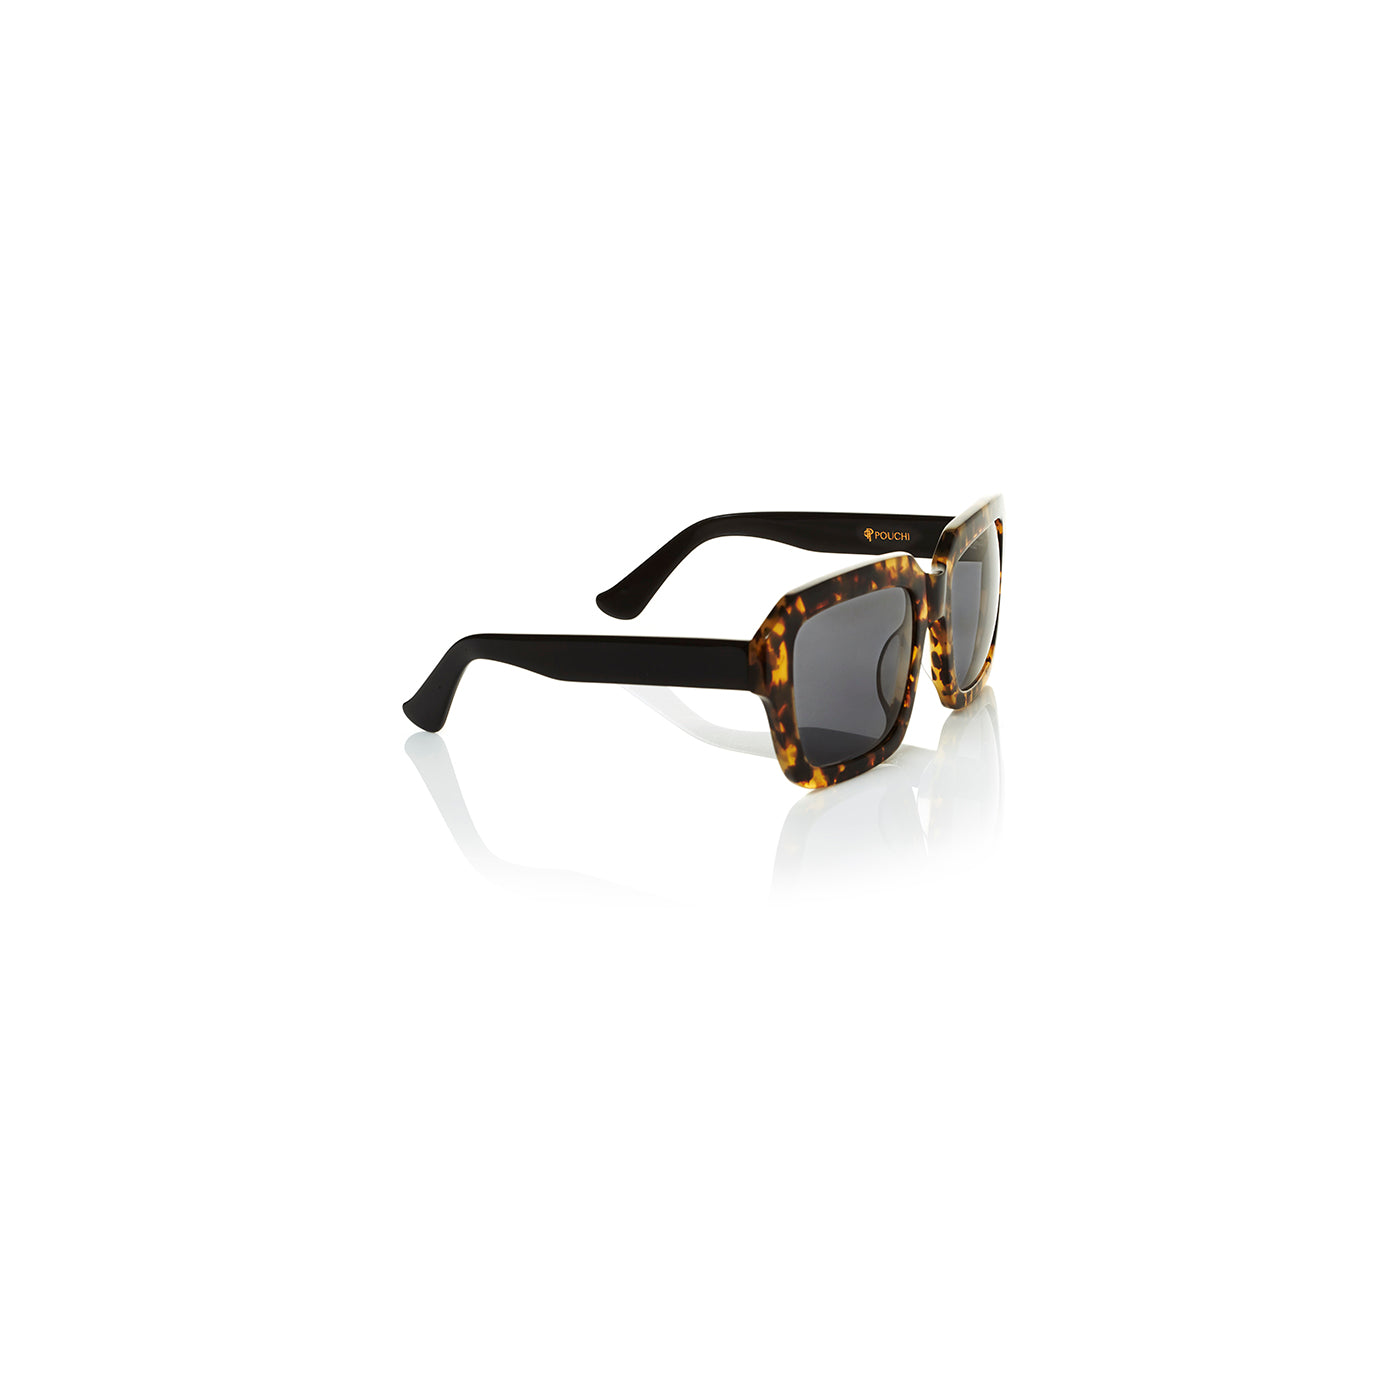 Side image Pouchi sunnies square (sunglass with UVA/UVB)